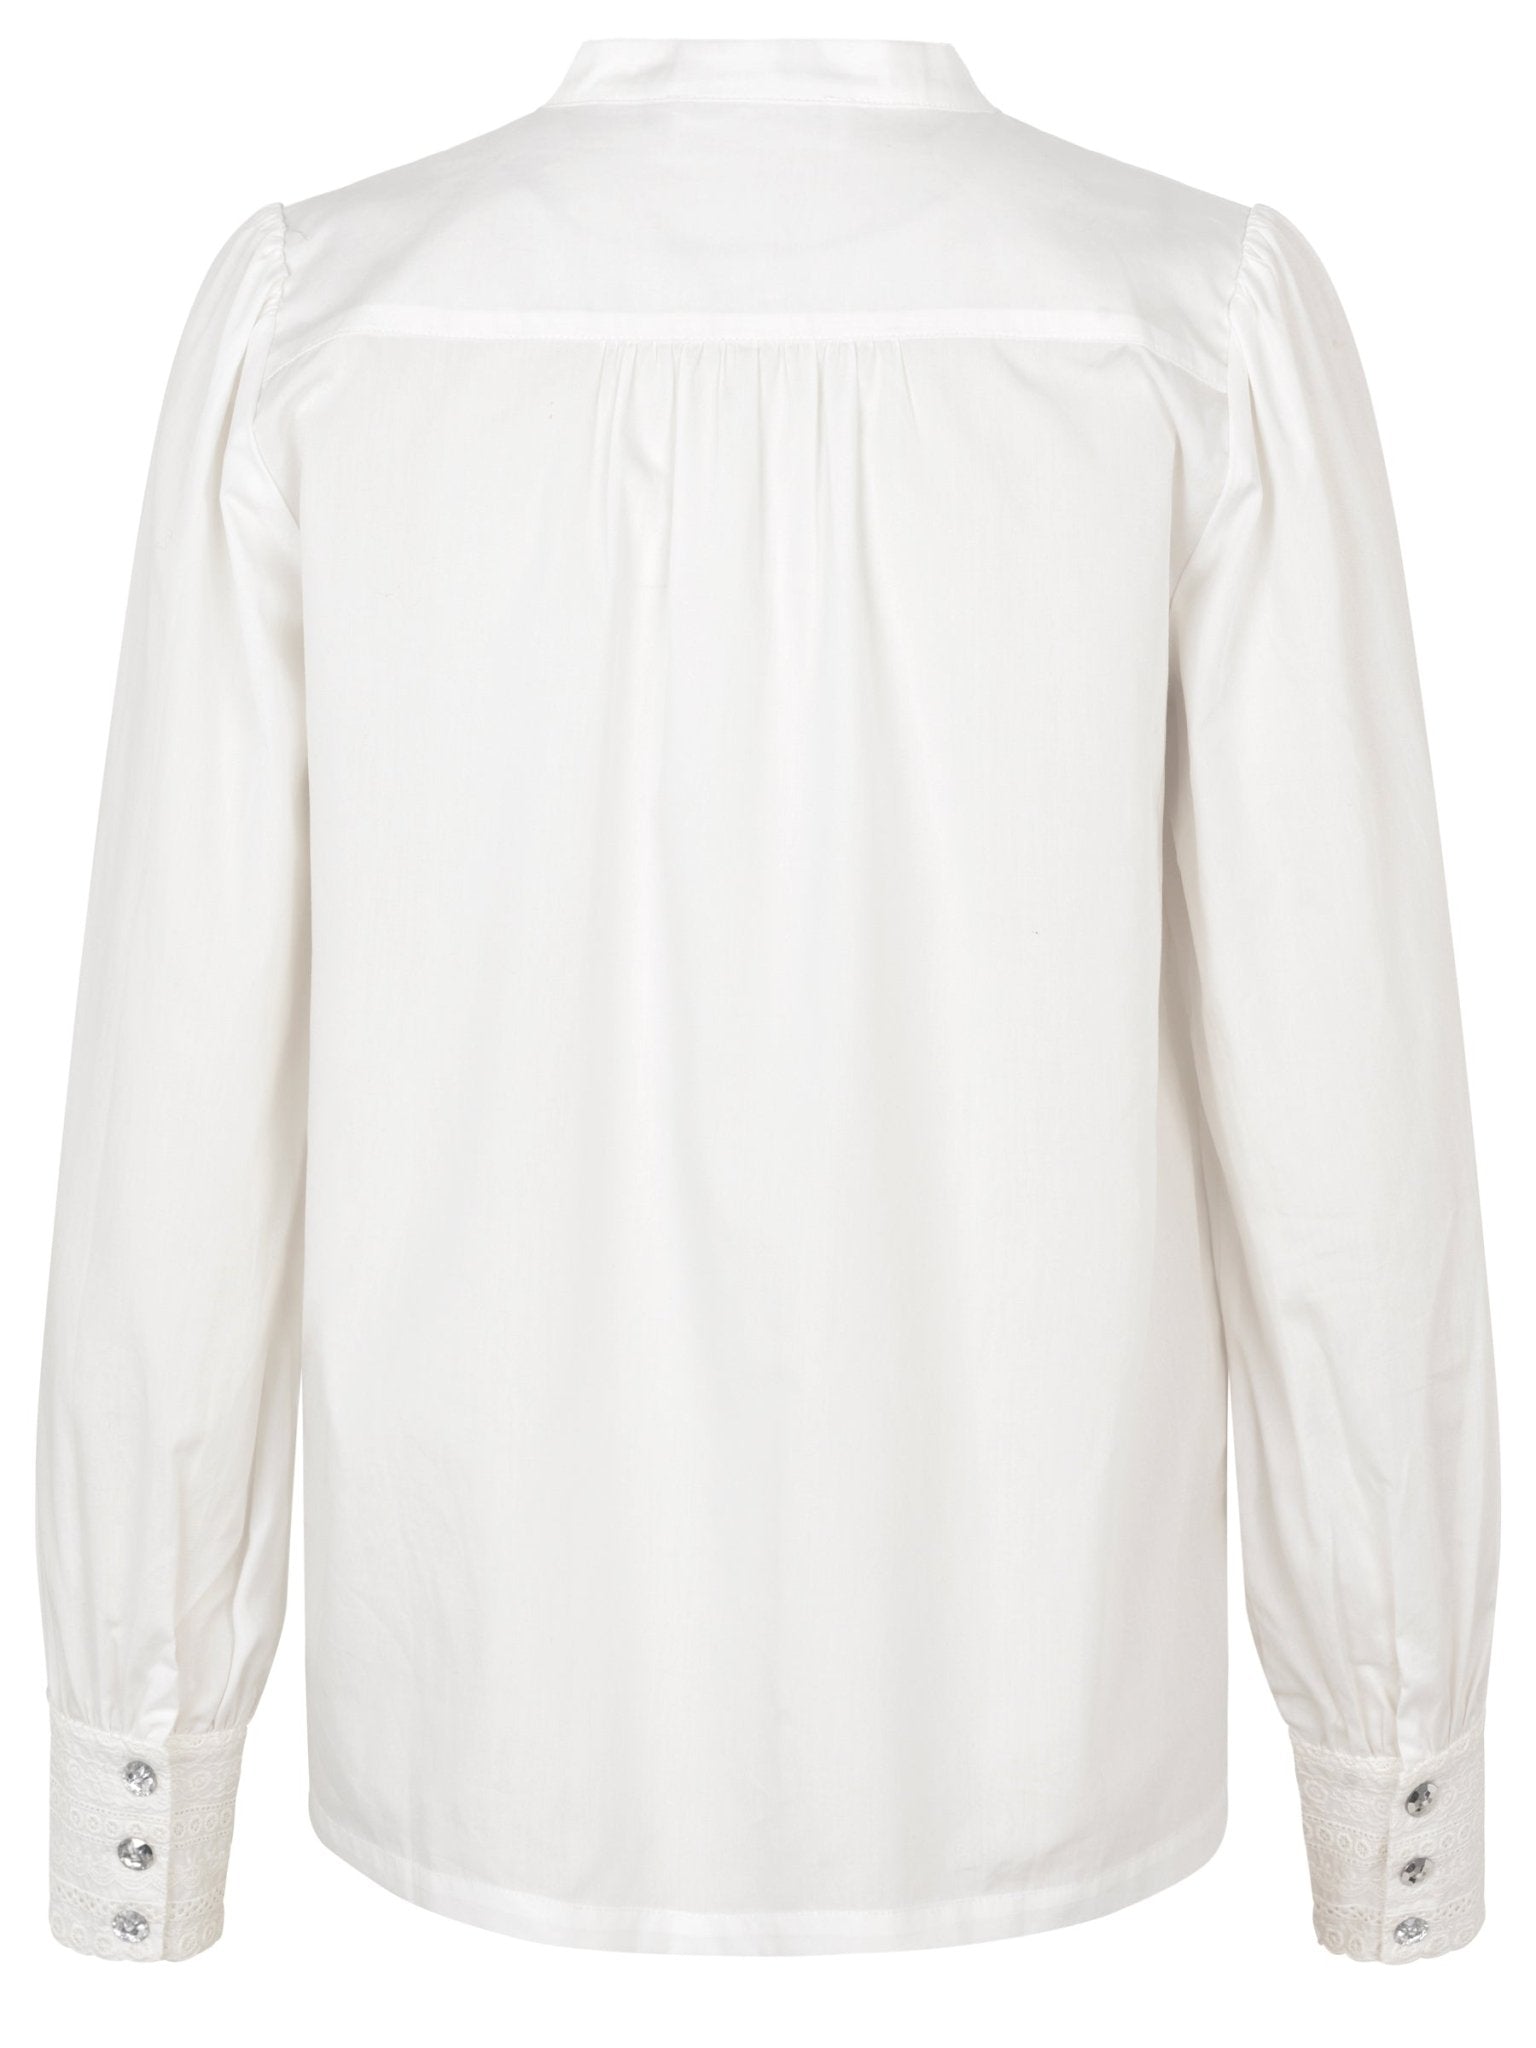 Shop Broderie Angalise Button Through Blouse in White Organic Cotton - Rosemunde Back